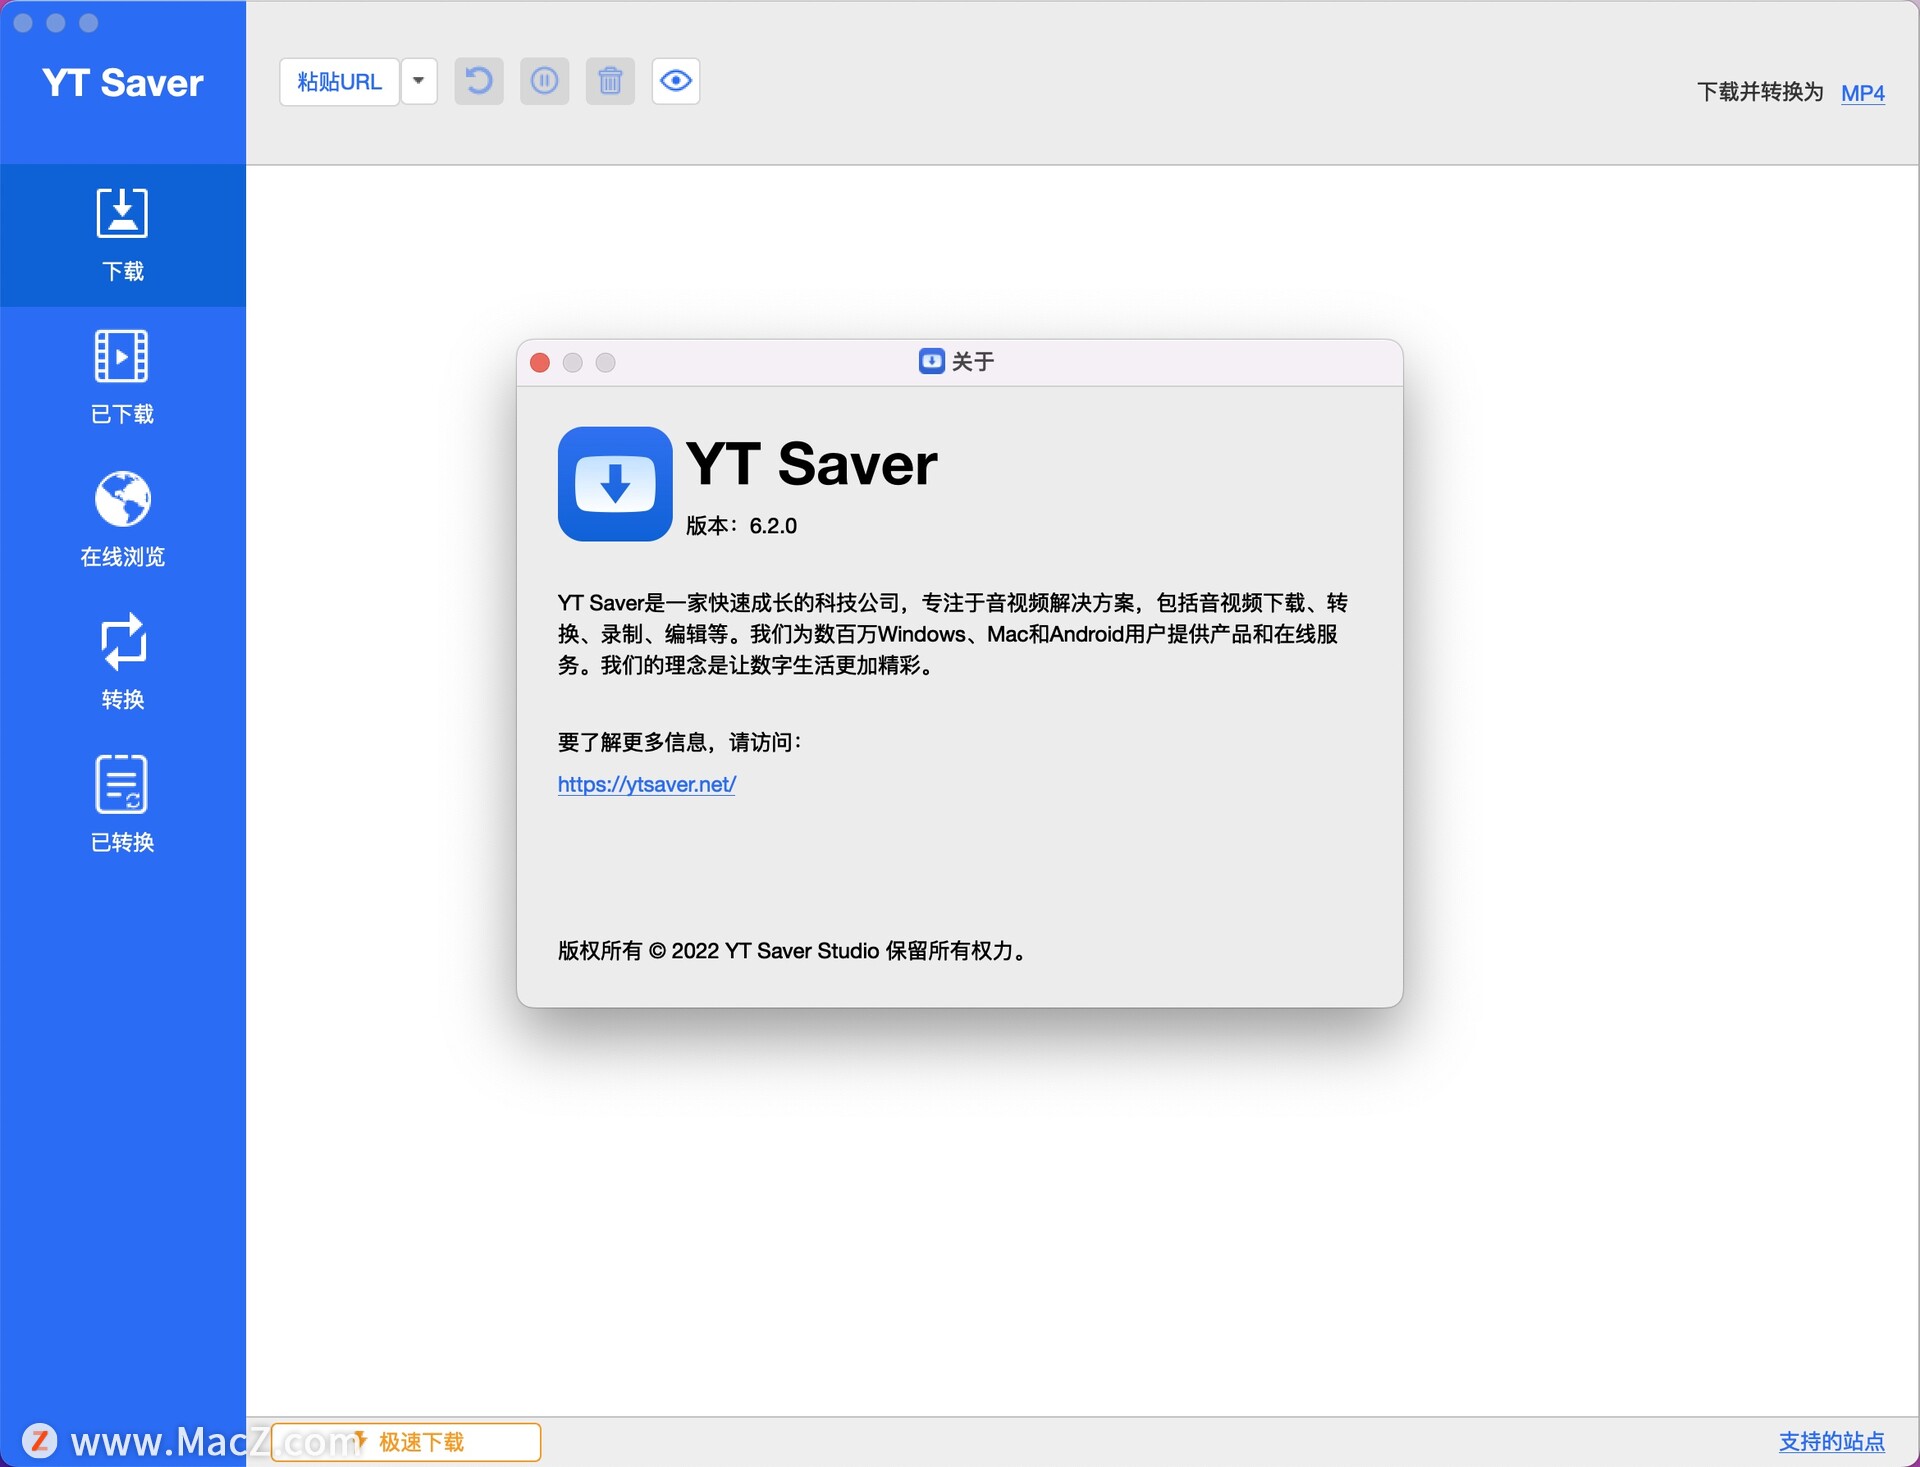 YT Saver 7.0.1 for mac download